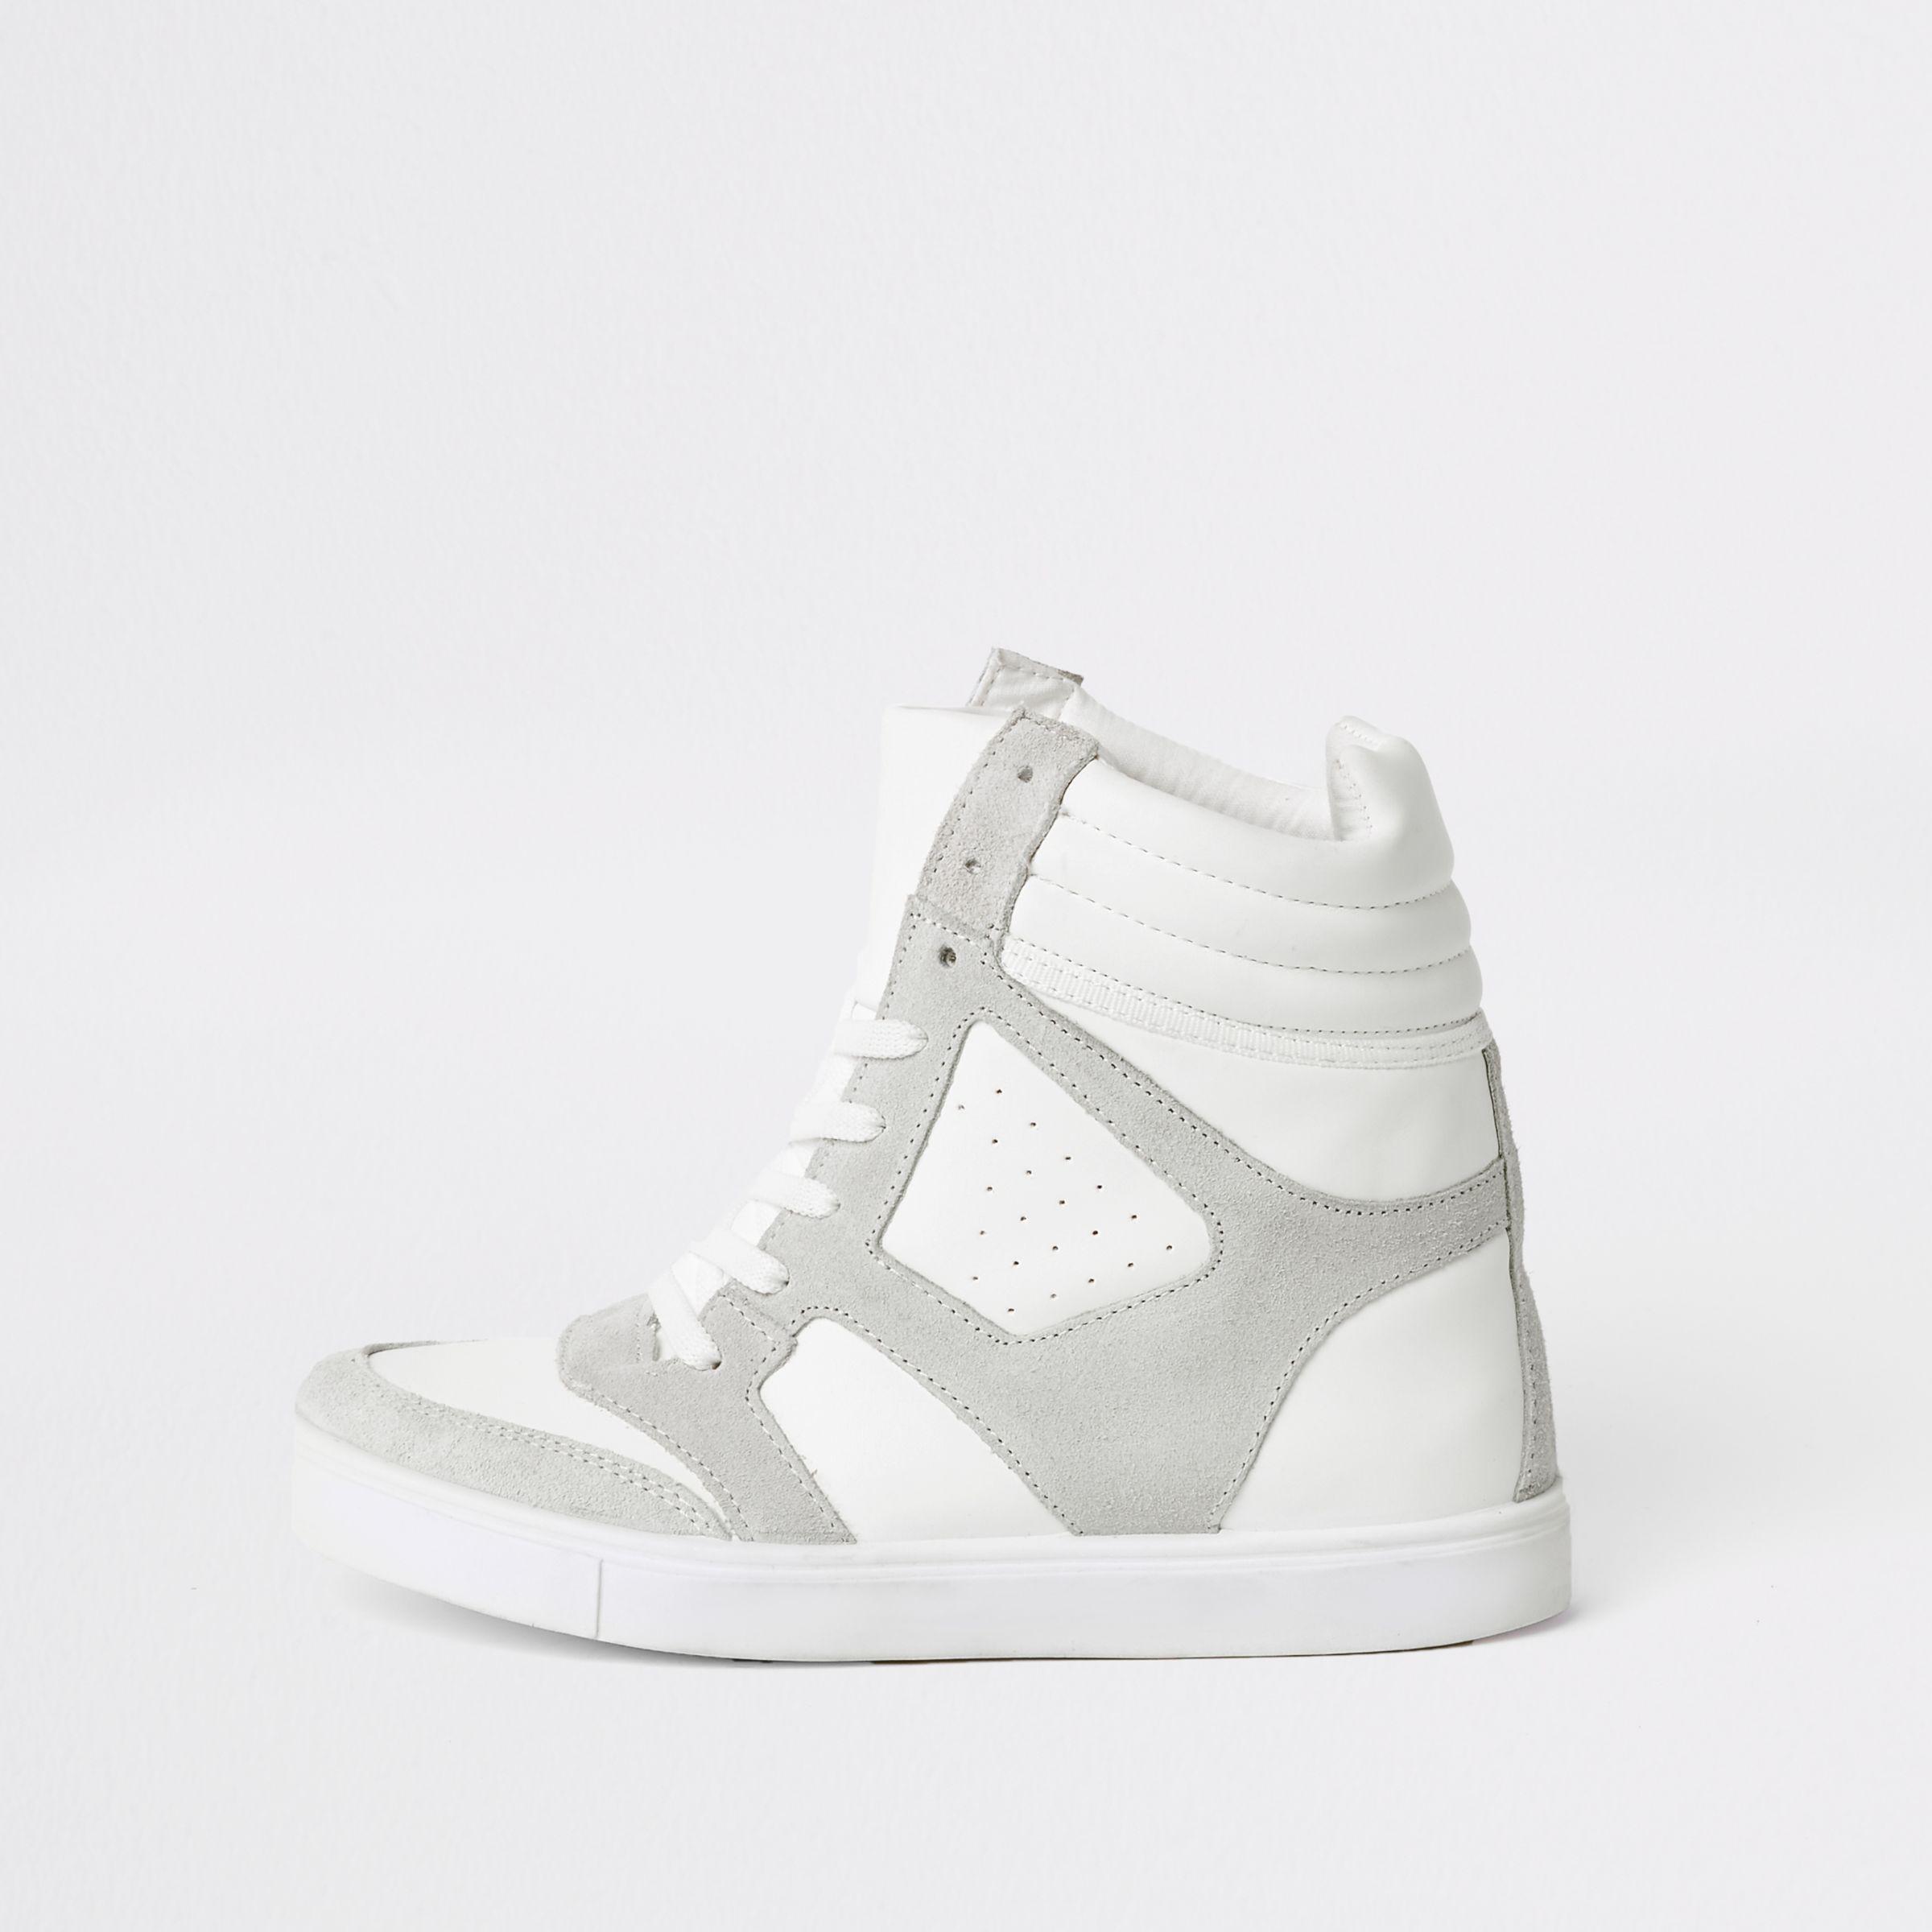 River Island Hidden Wedge High Top Trainers in White | Lyst